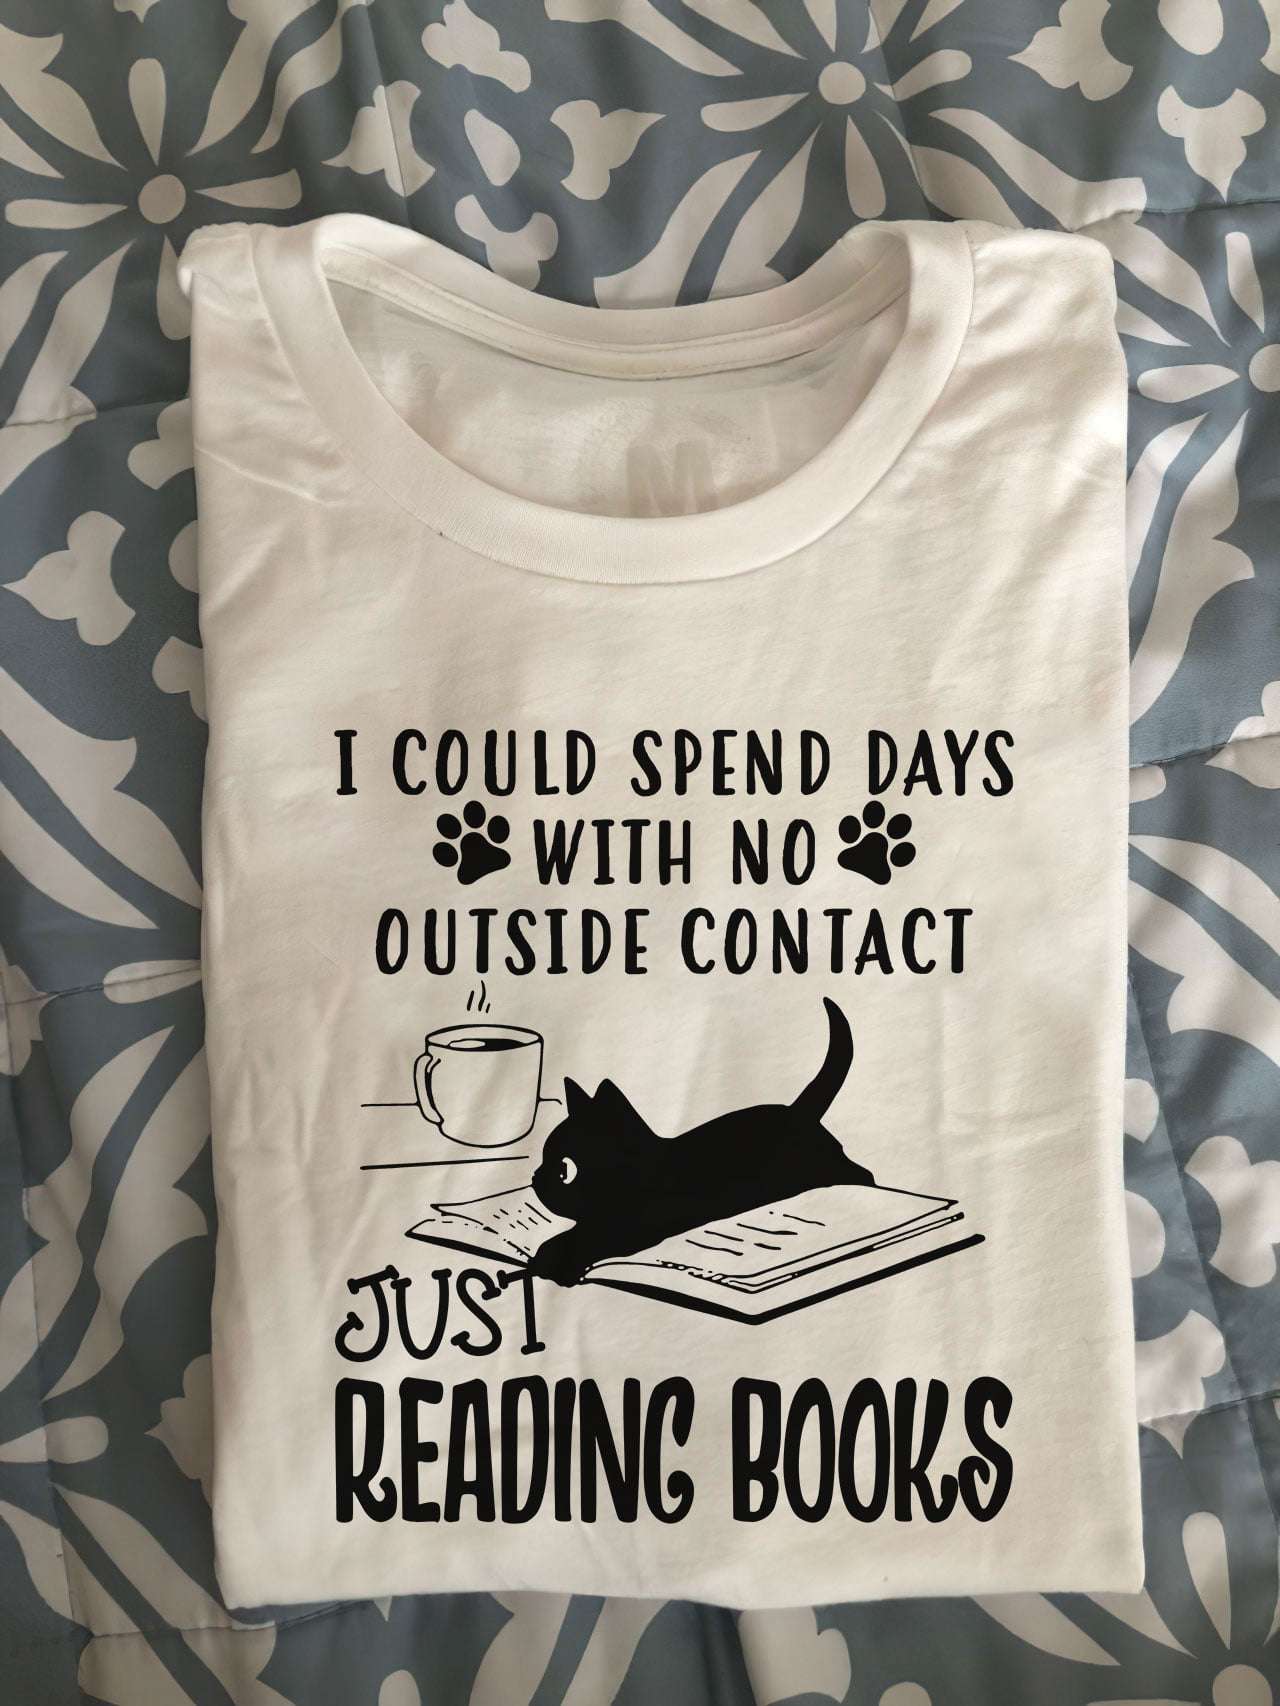 I could spend days with no outside contact just reading books - Black cat reading books, book and coffee